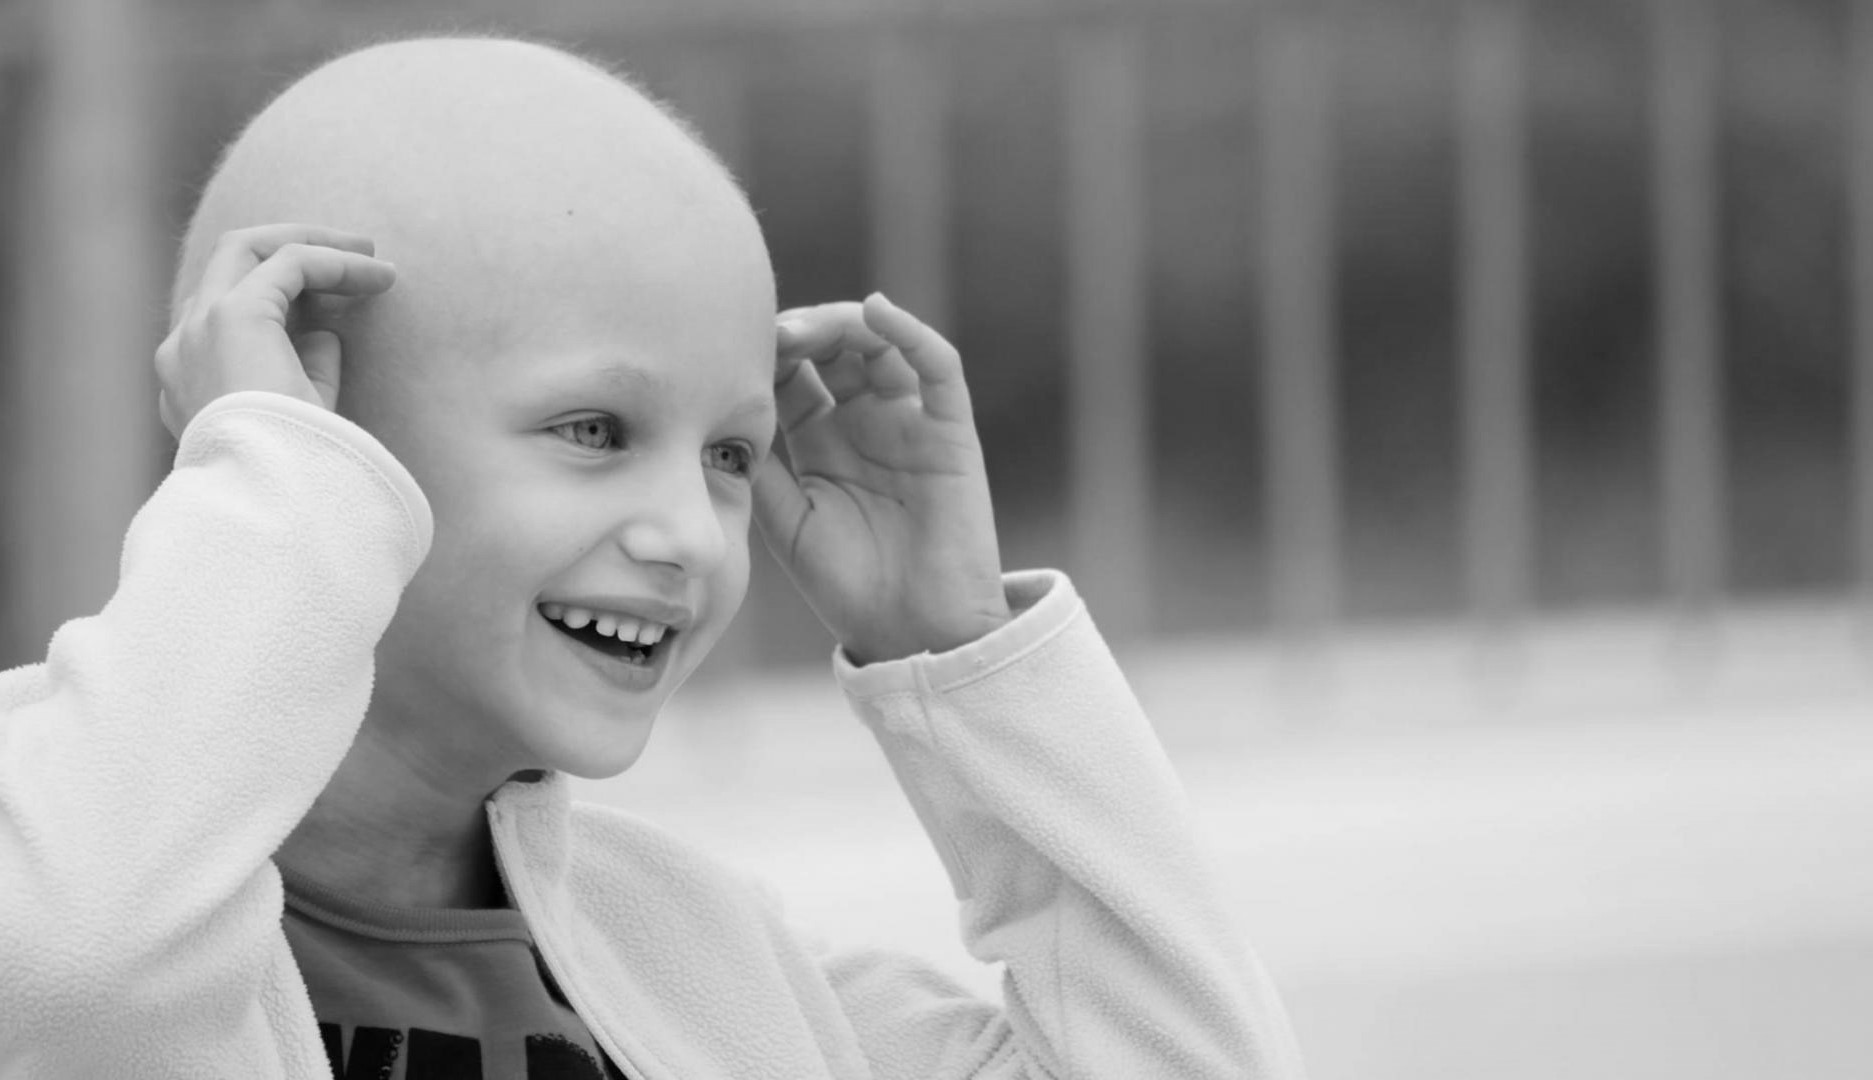 Listen to expressive music in oncology - positive effects of music with cancer patients